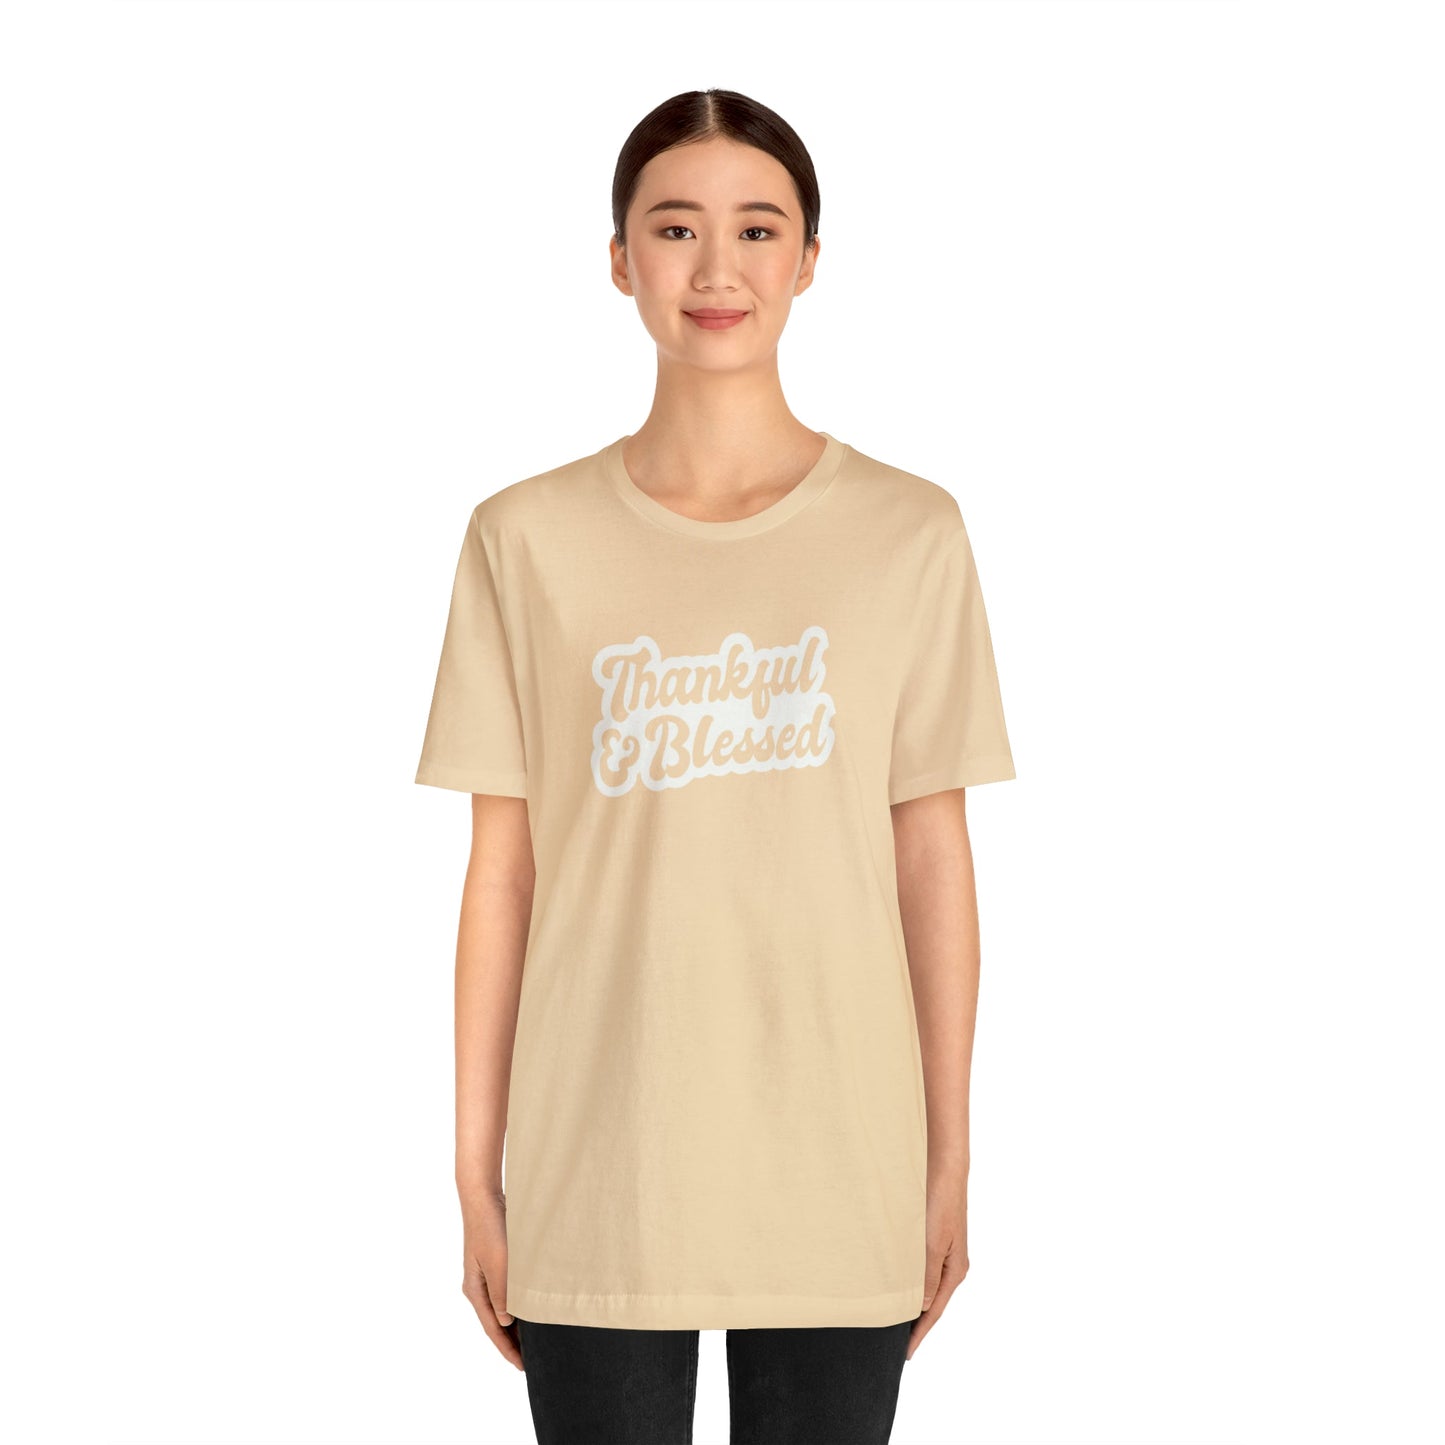 Thankful and Blessed Unisex Jersey Short Sleeve Tee - Global Village Kailua Boutique